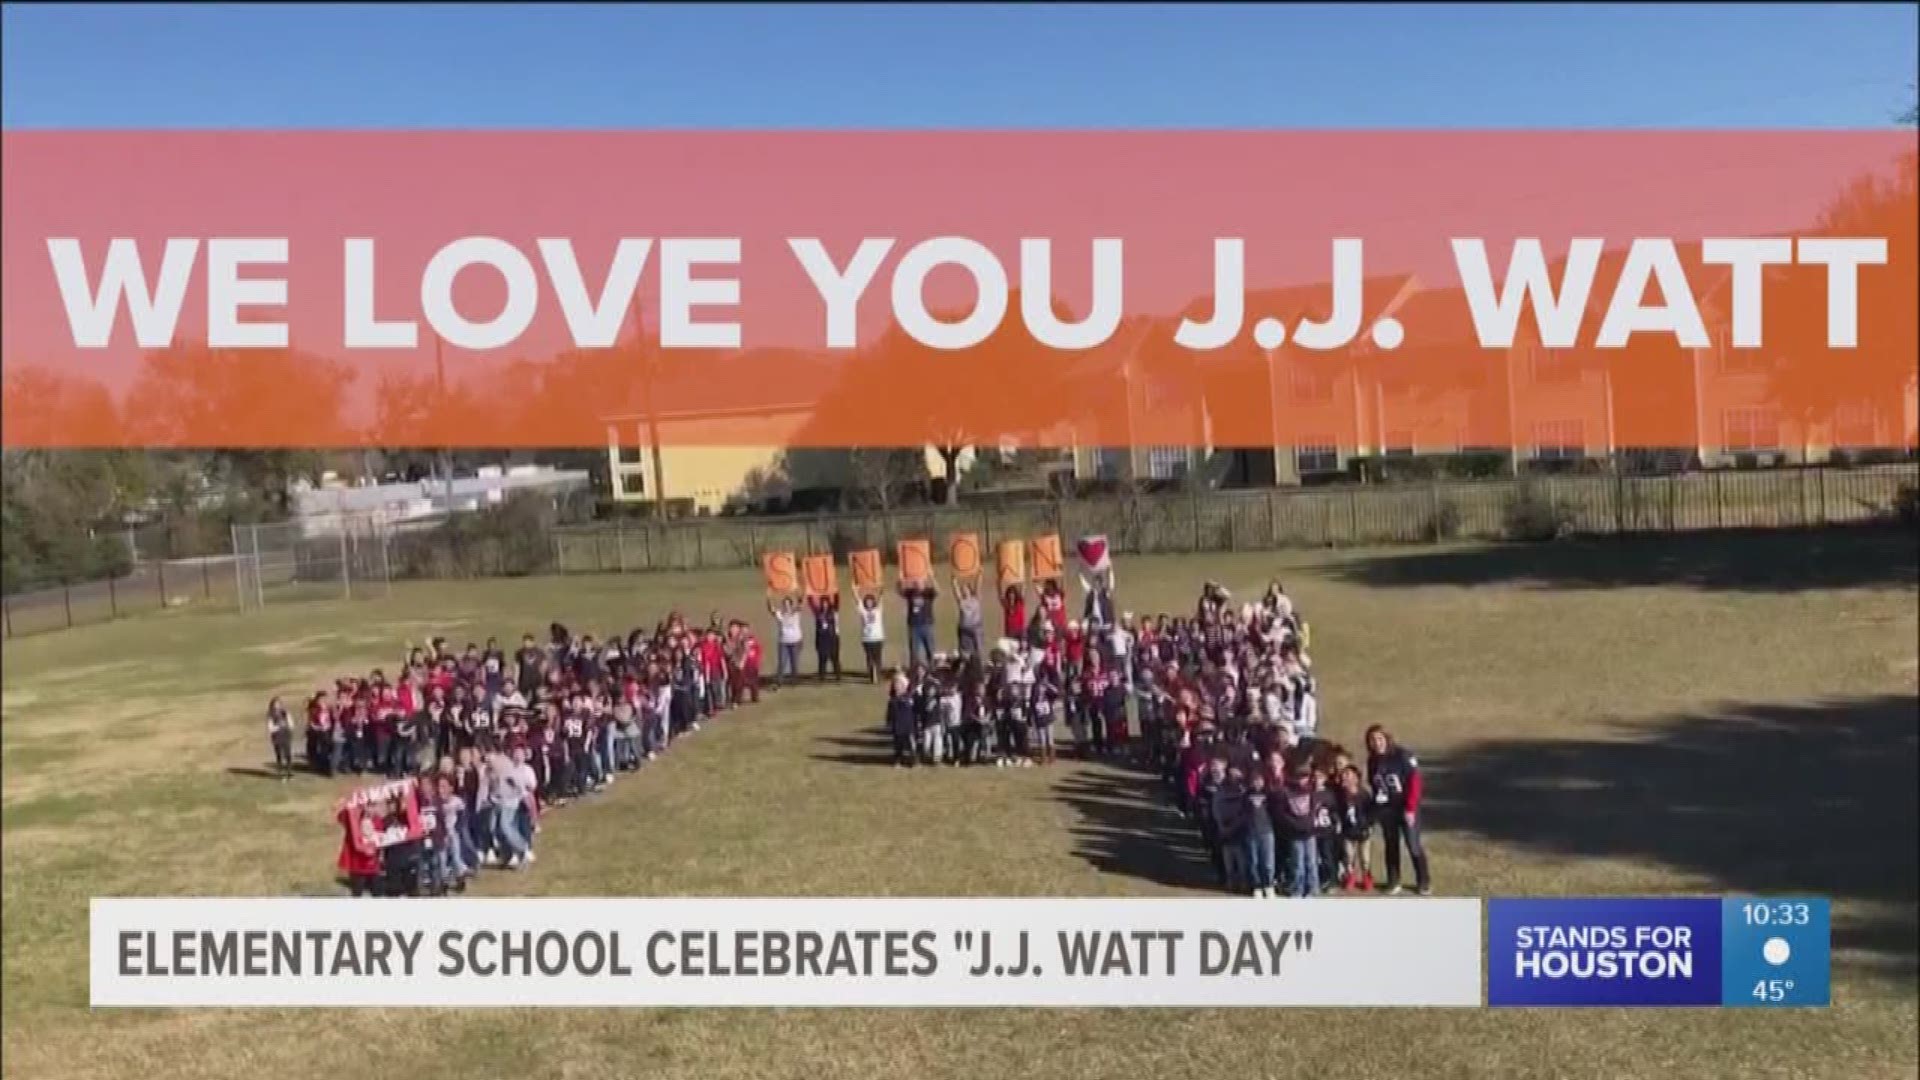 This was the 99th day of school at Sundown Elementary so the kids celebrated by honoring #99.